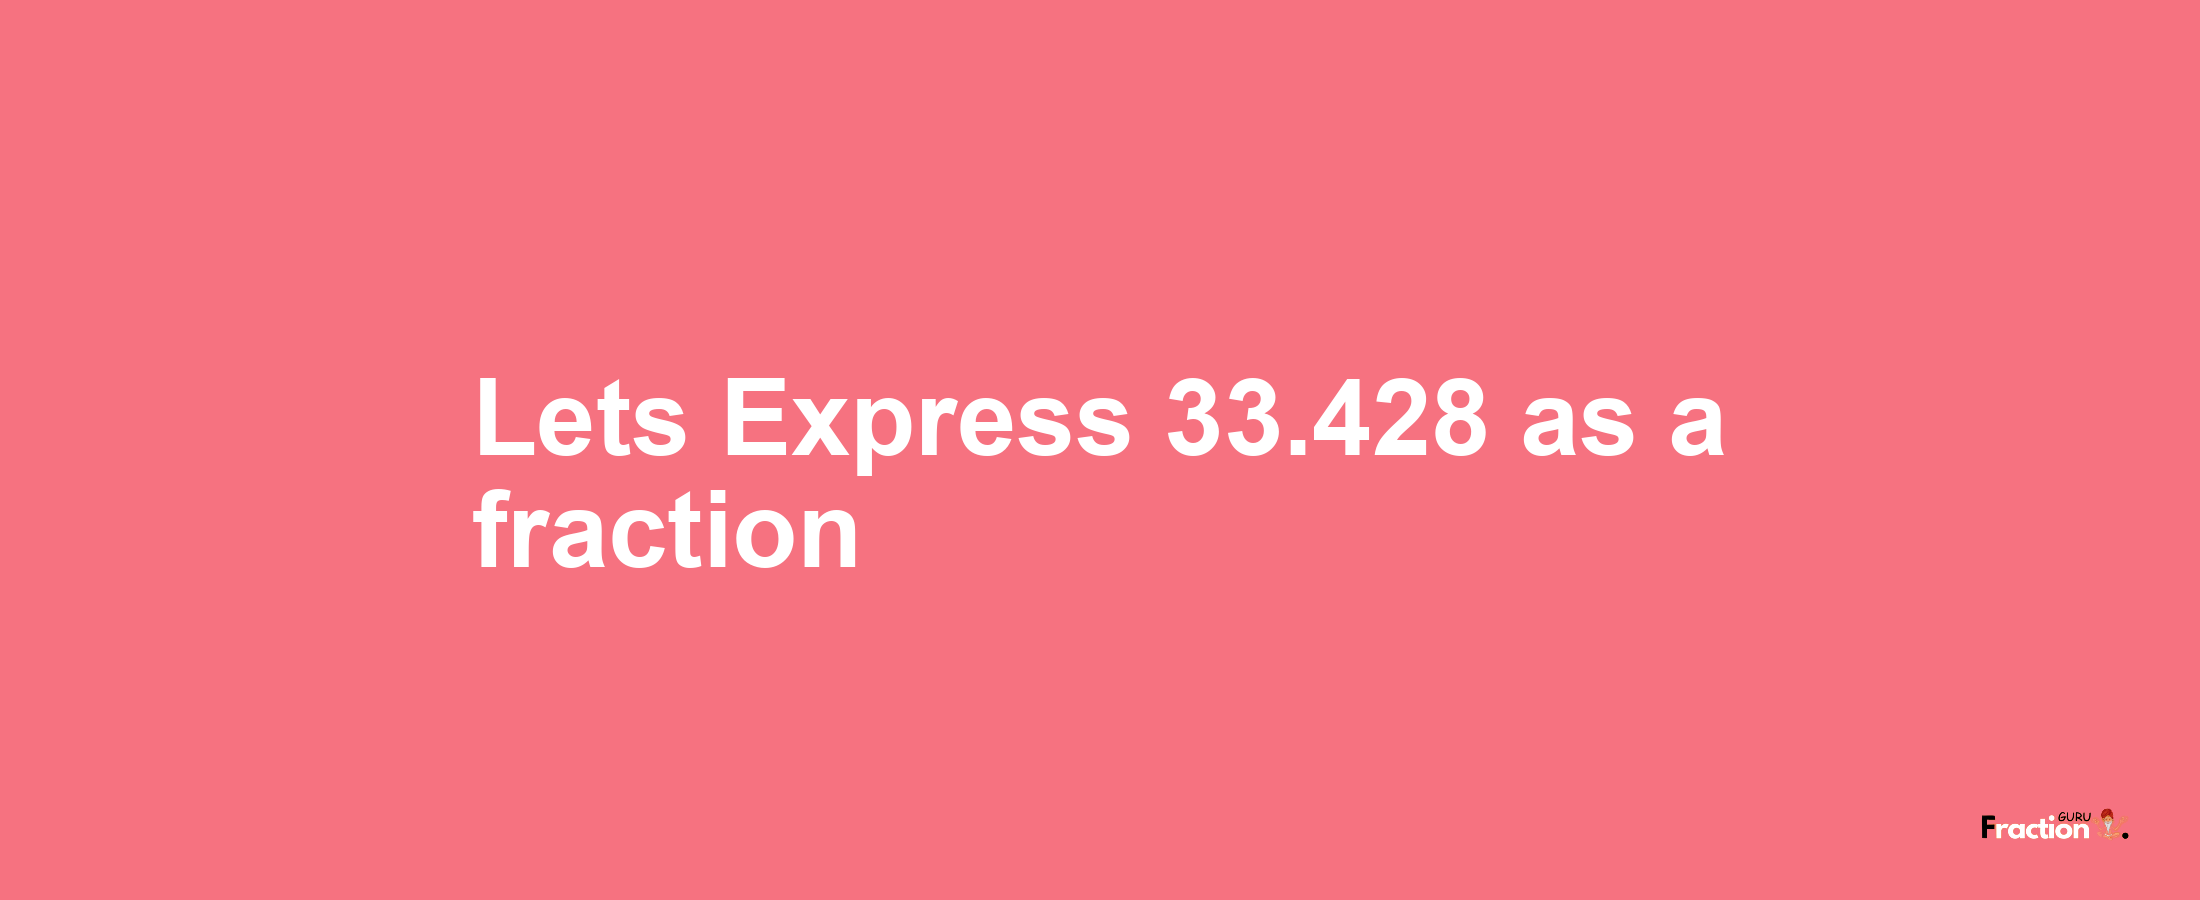 Lets Express 33.428 as afraction